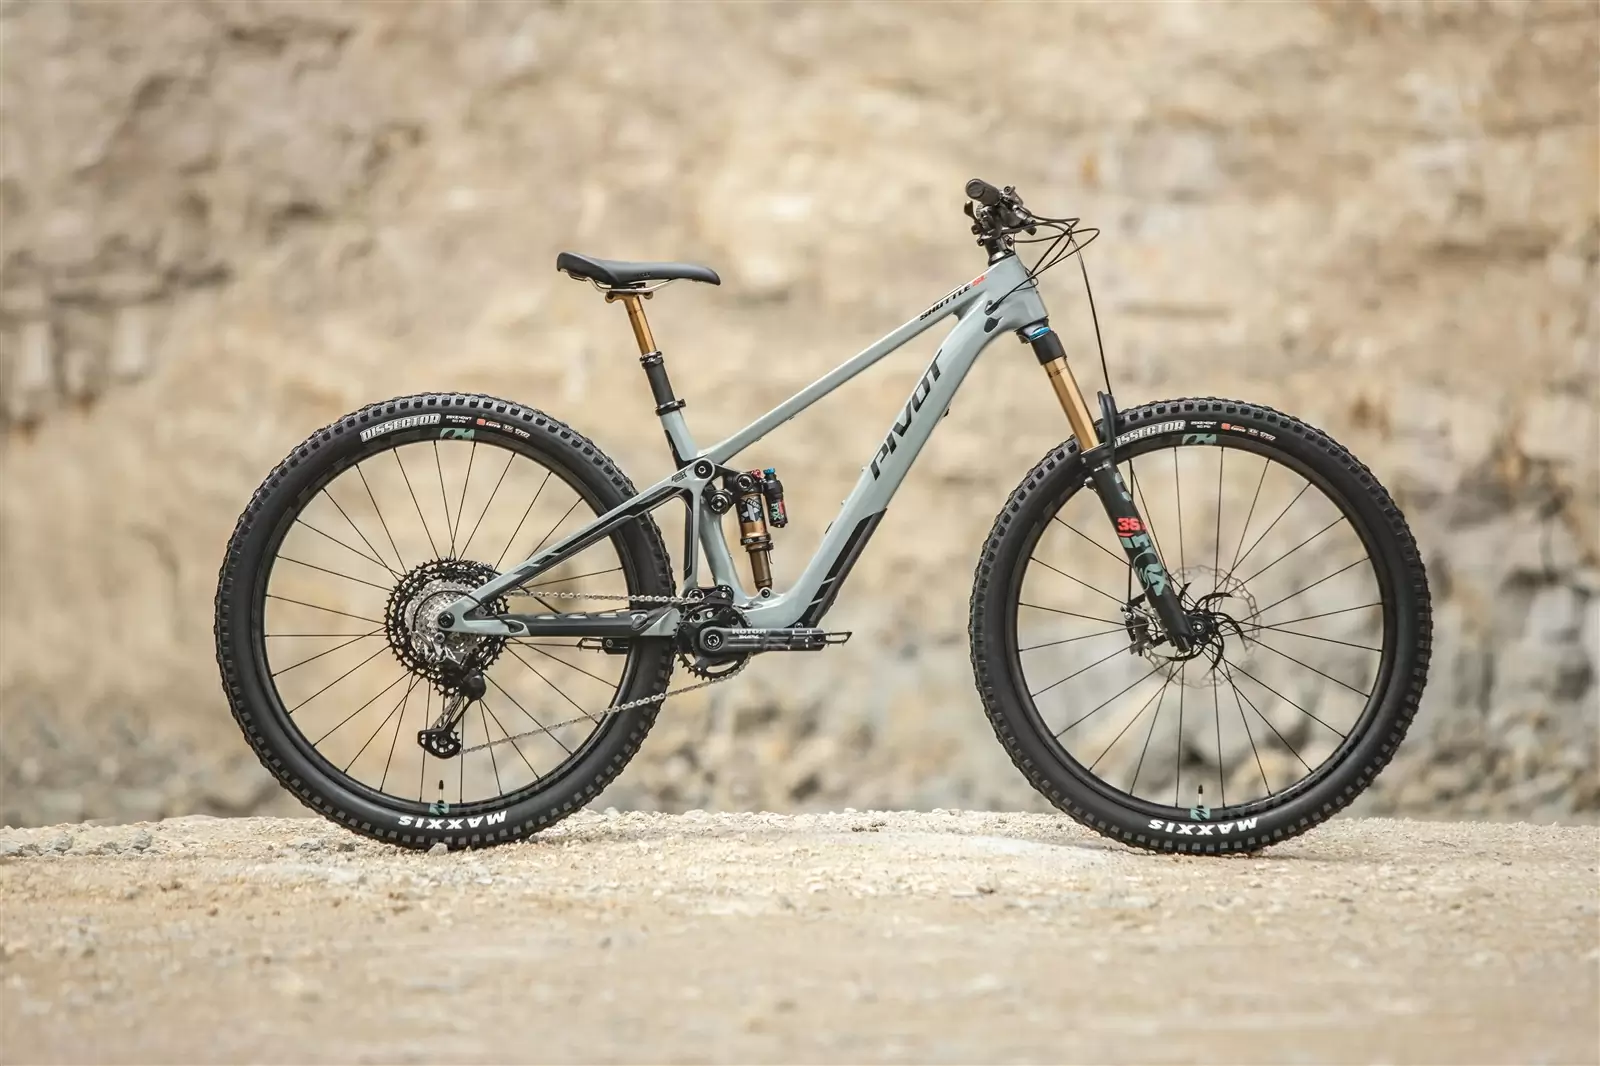 The new Pivot Shuttle SL is available on Ridewill - image